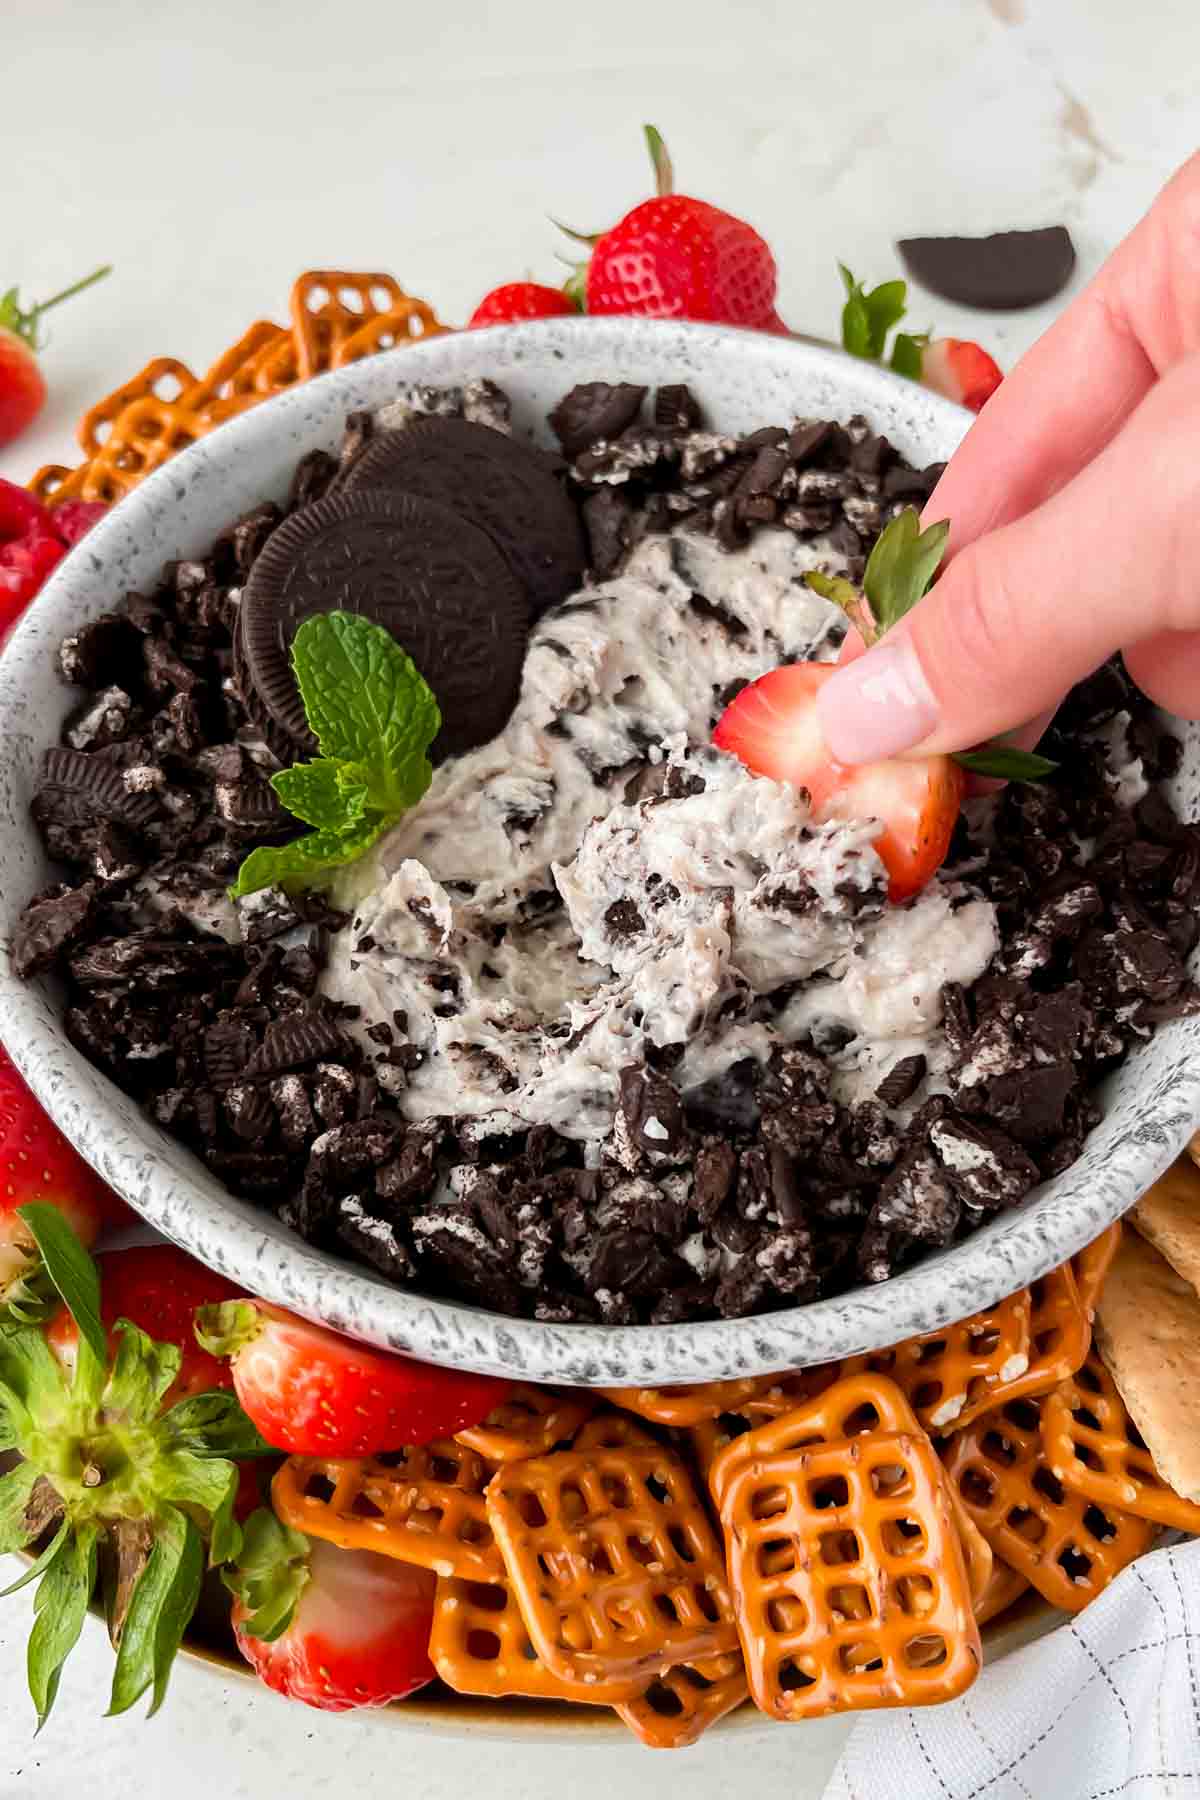 halved strawberry being dipped into oreo dip.